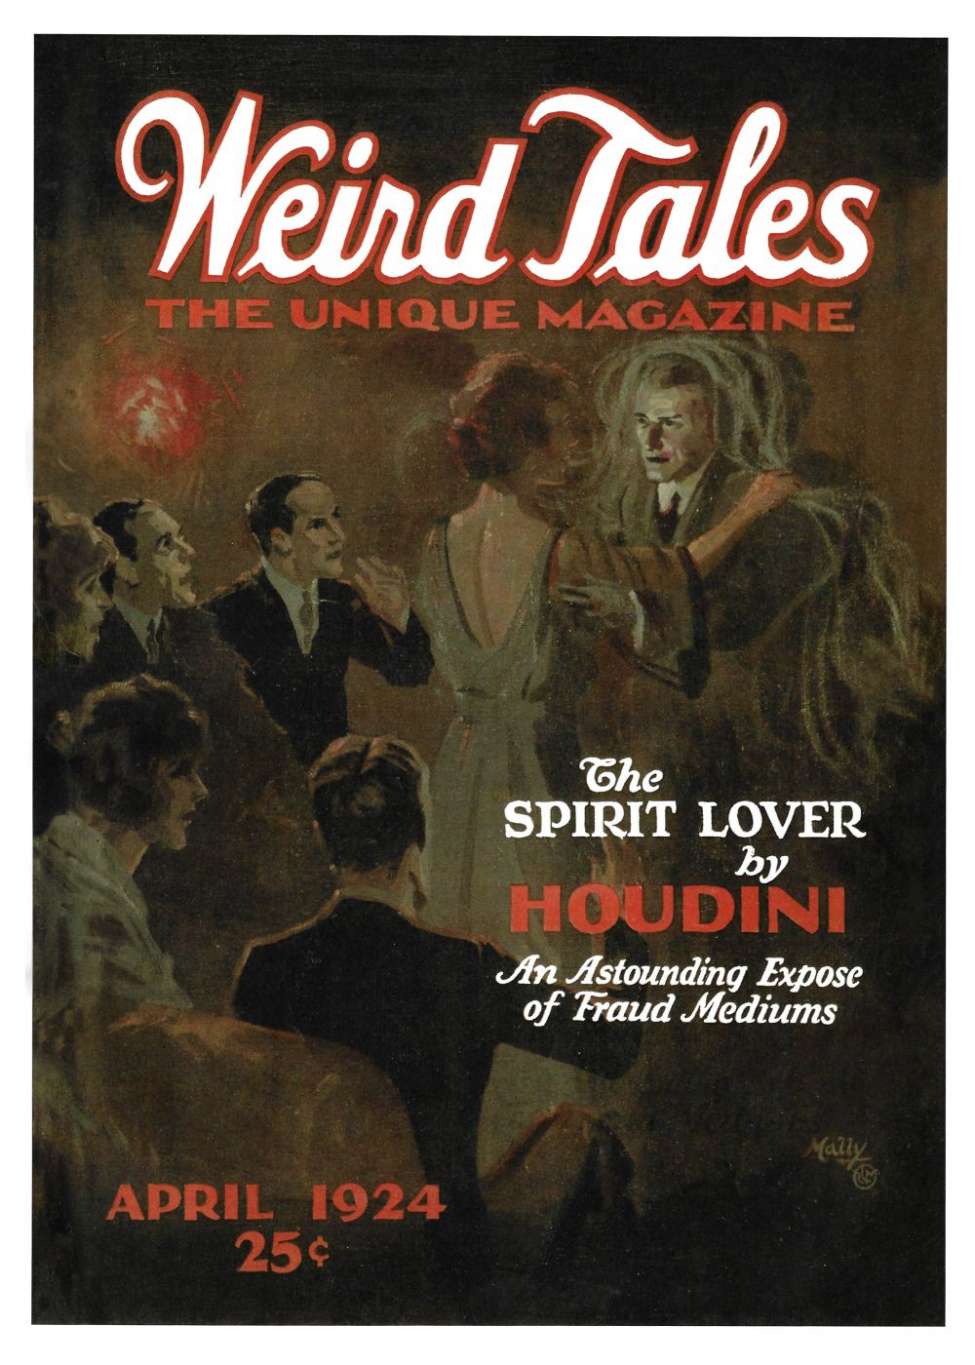 Book Cover For Weird Tales v3 4 - The Hoax Of The Spirit Lover - Houdini